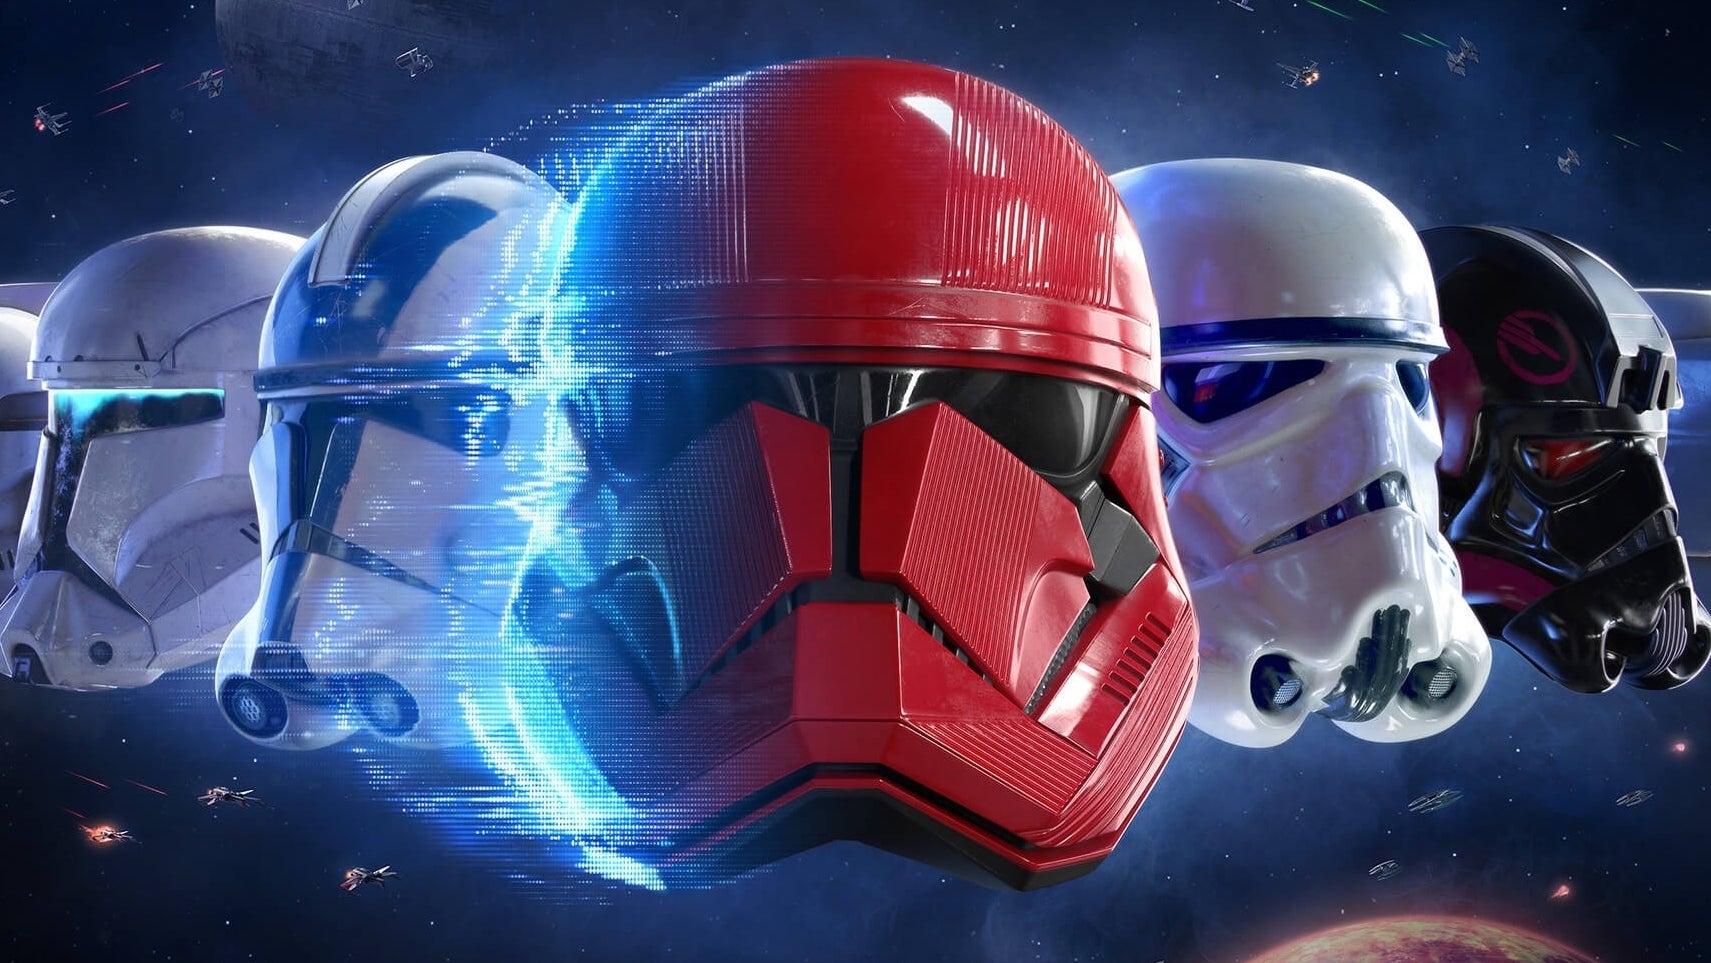 Image for EA forging ahead with Star Wars titles despite end of exclusivity deal